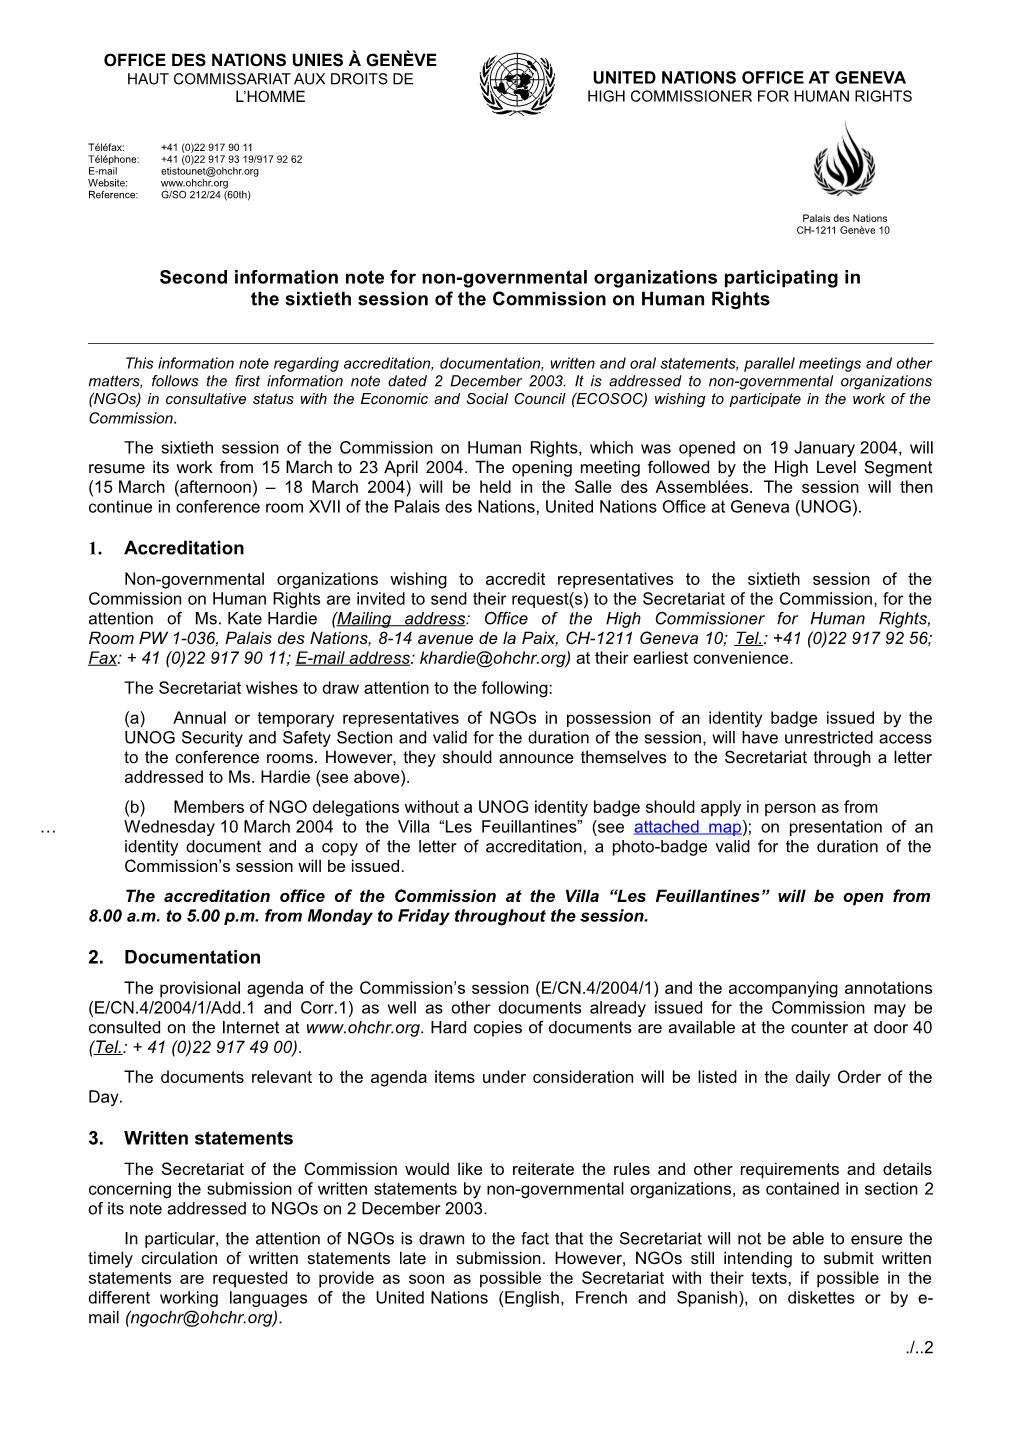 Second Information Note for Non-Governmental Organizationsparticipating In